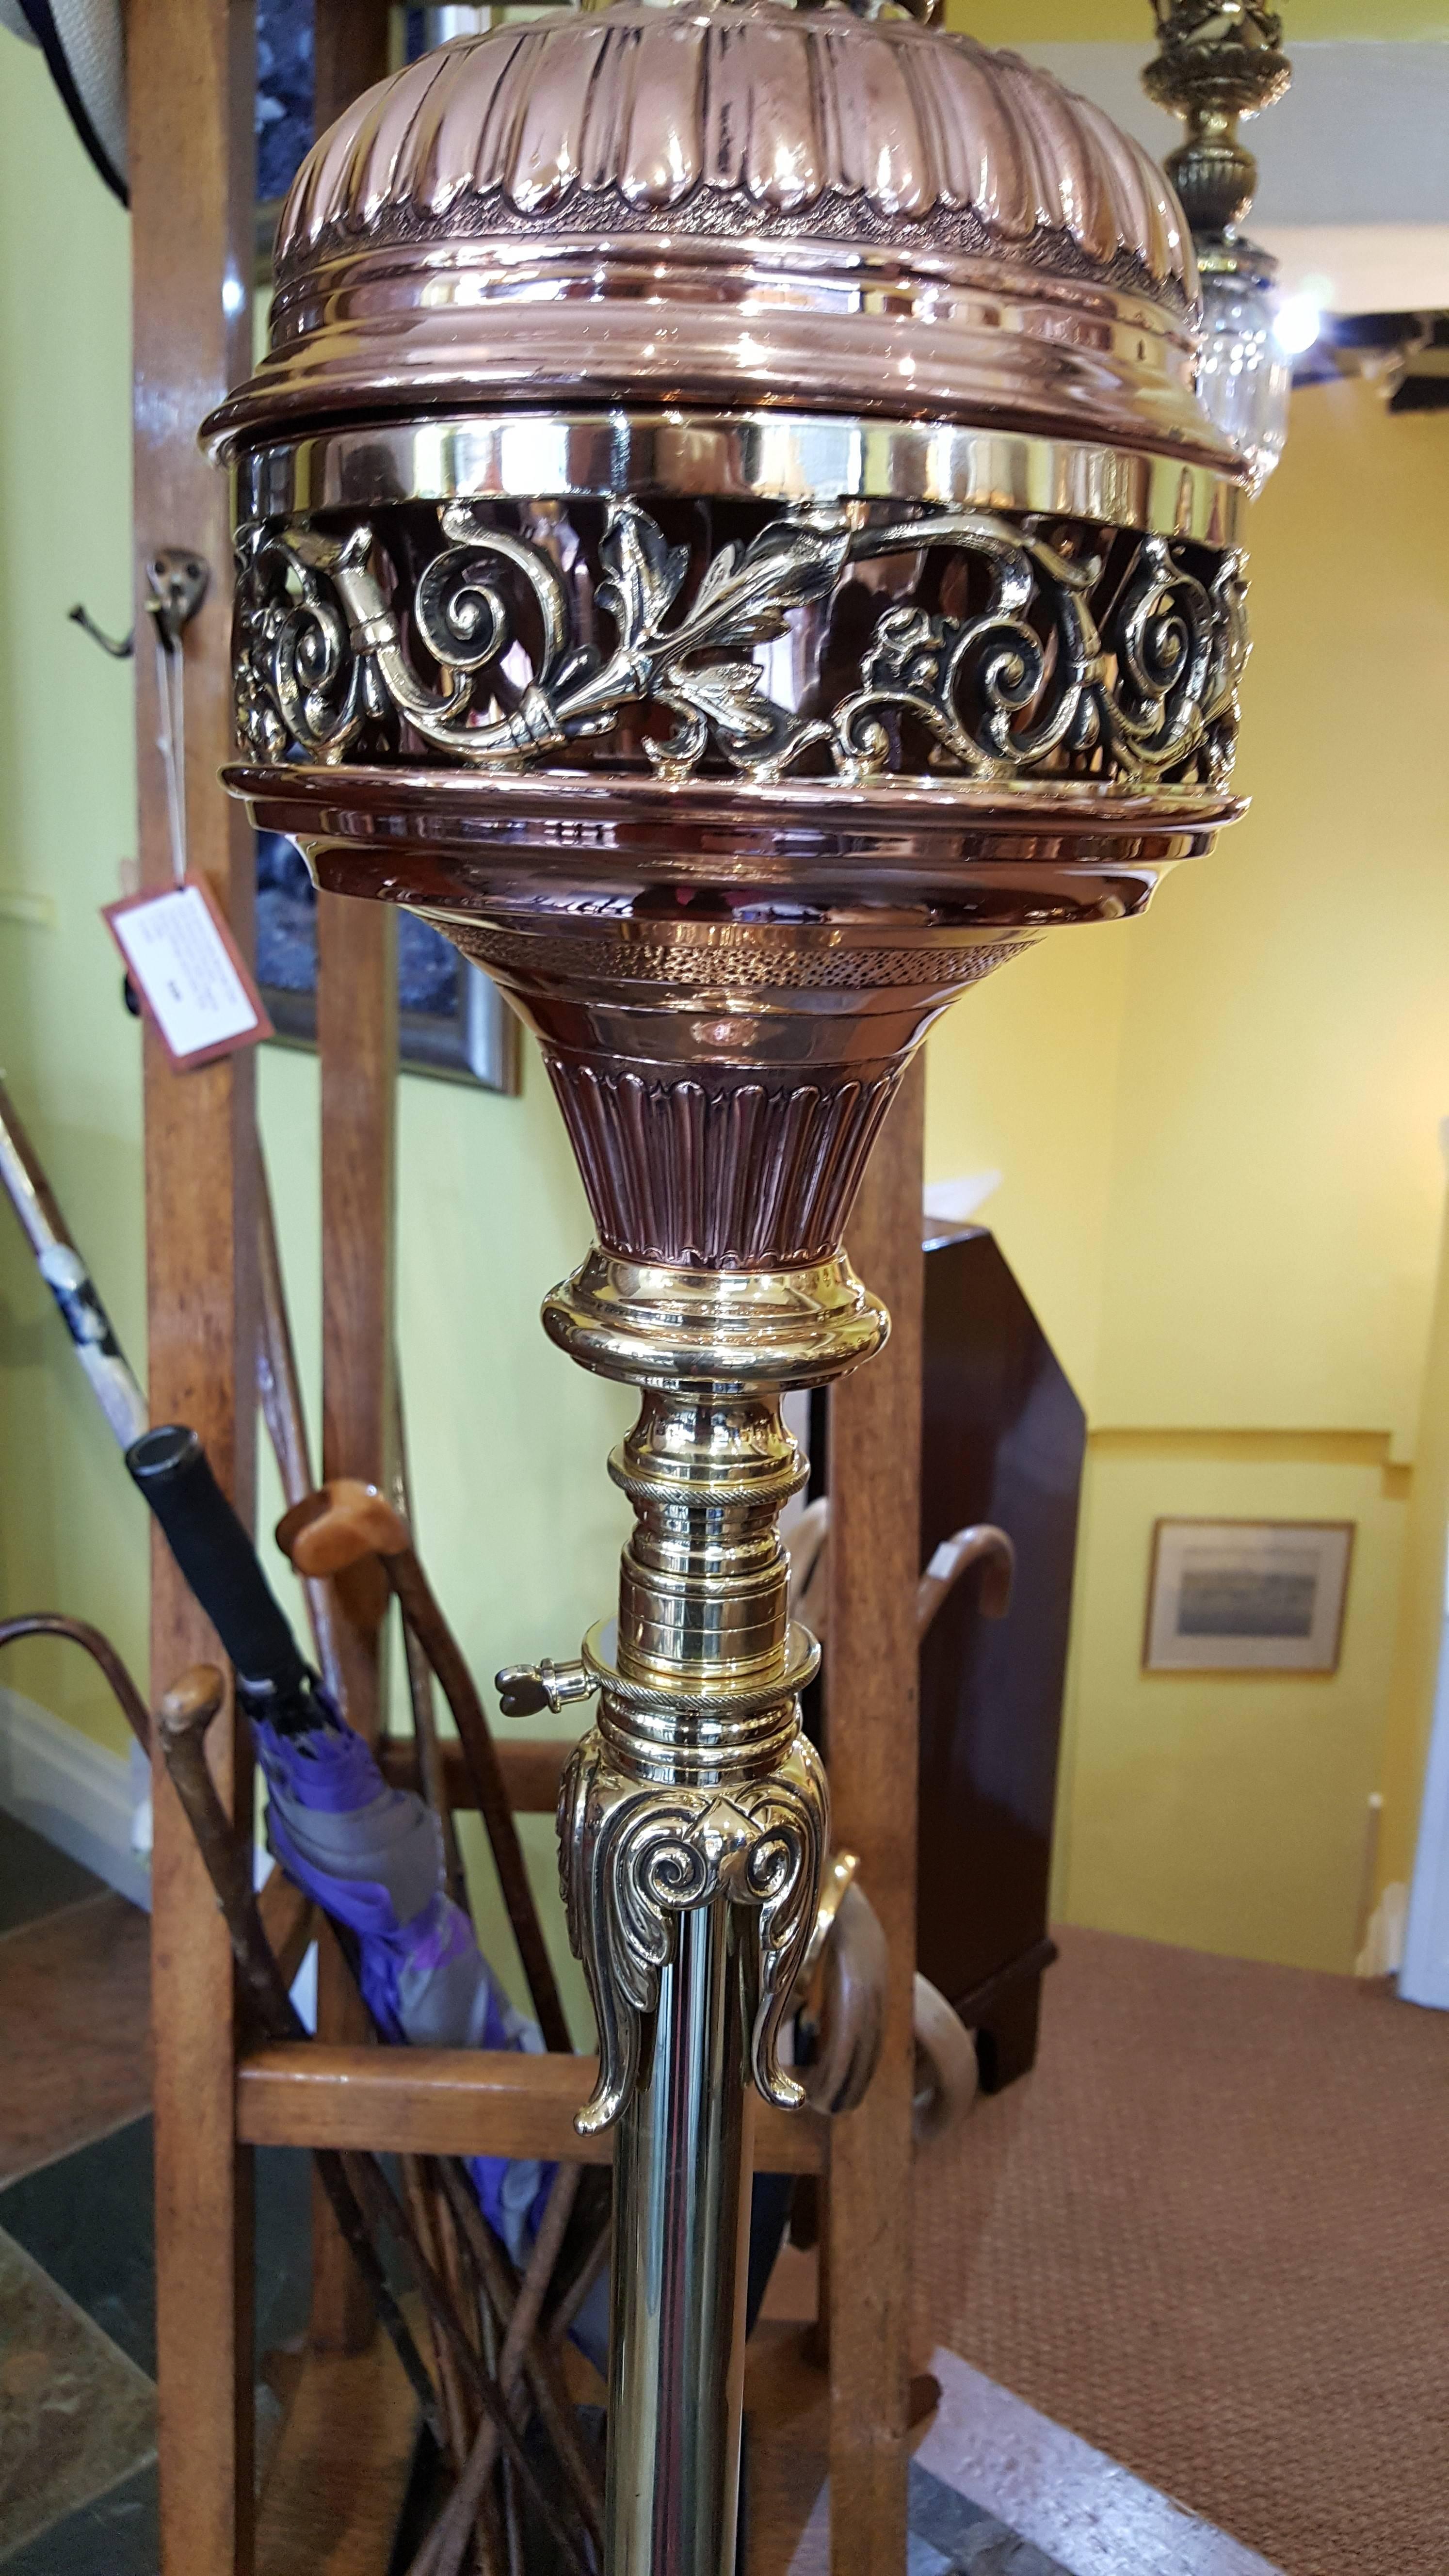 Art Nouveau Hinks & Sons copper and brass telescopic standard oil lamp with pierced and cast foliate design, raised on three foliate bracket supports converted to electric
The lampshade(s) are newly handmade silks by the same maker as provides the